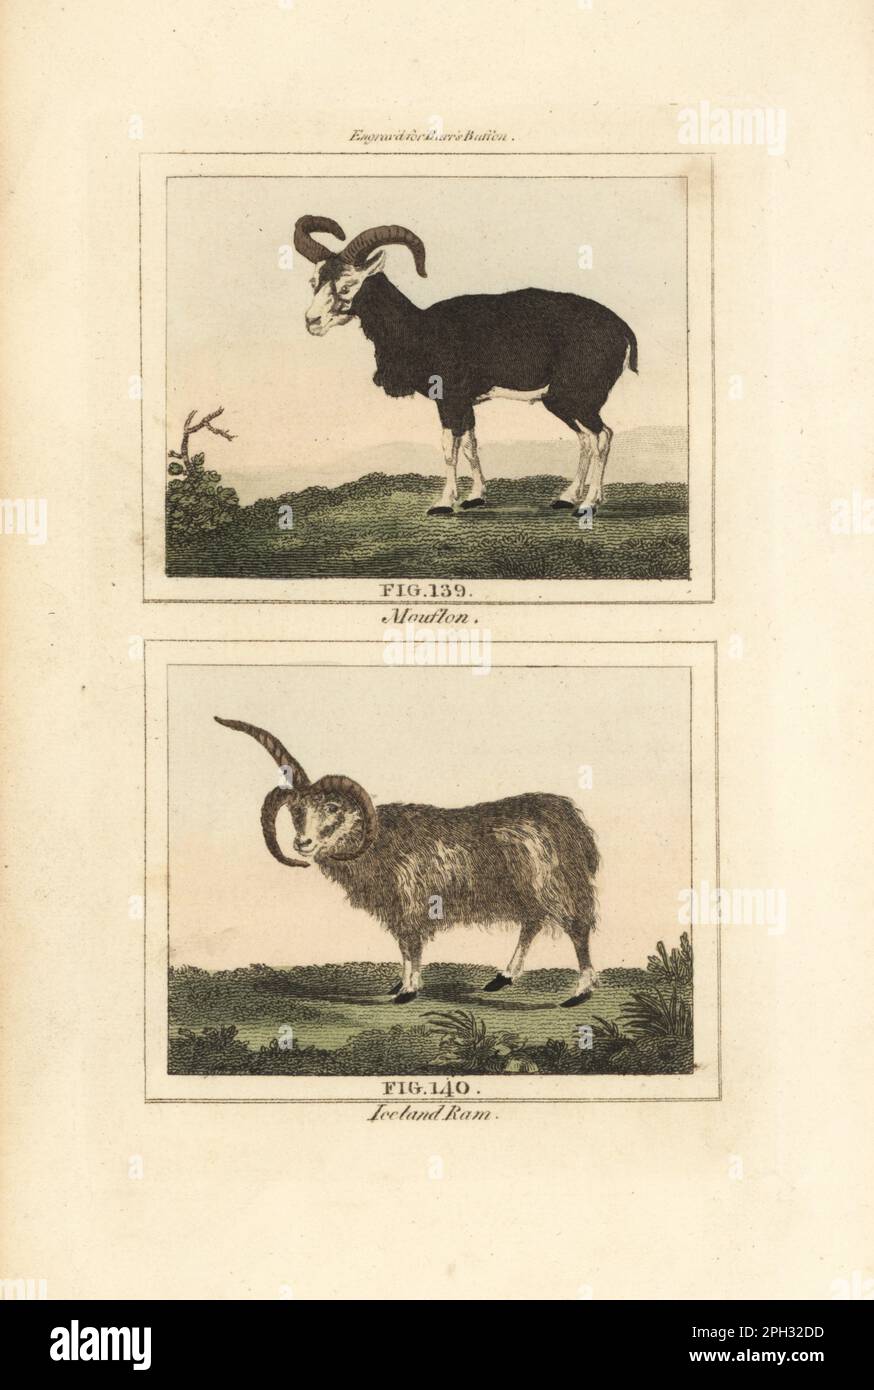 Mouflon, Ovis gmelini 139 and long-haired, multi-horned Iceland ram, domesticated sheep breed, Ovis aries 140. Handcoloured copperplate engraving after Jacques de Seve from James Smith Barr’s edition of Comte Buffon’s Natural History, A Theory of the Earth, General History of Man, Brute Creation, Vegetables, Minerals, T. Gillet, H. D. Symonds, Paternoster Row, London, 1807. Stock Photo